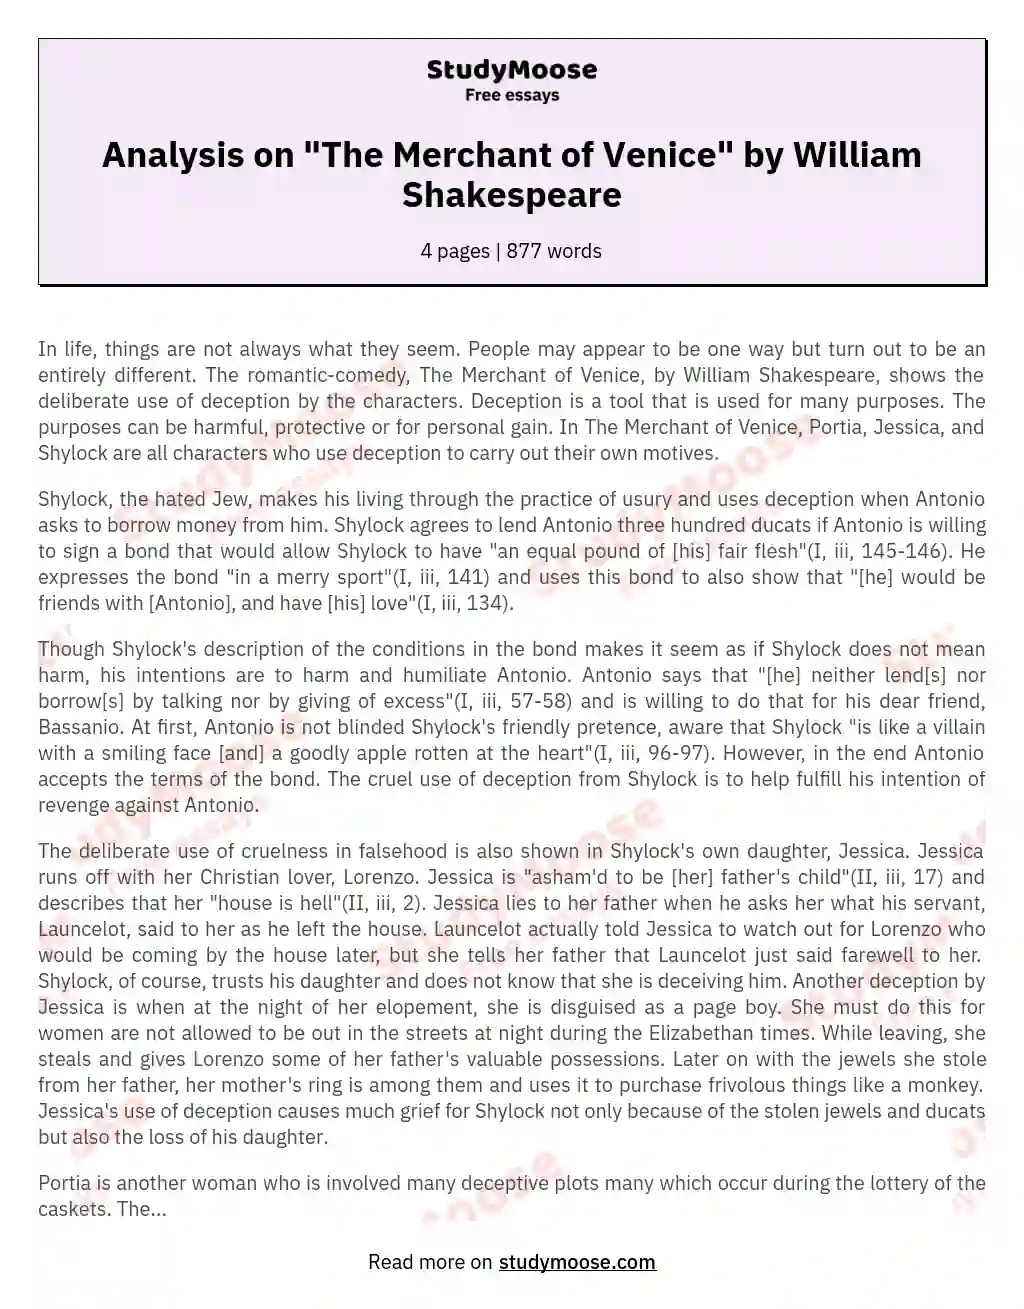 Analysis on "The Merchant of Venice" by William Shakespeare